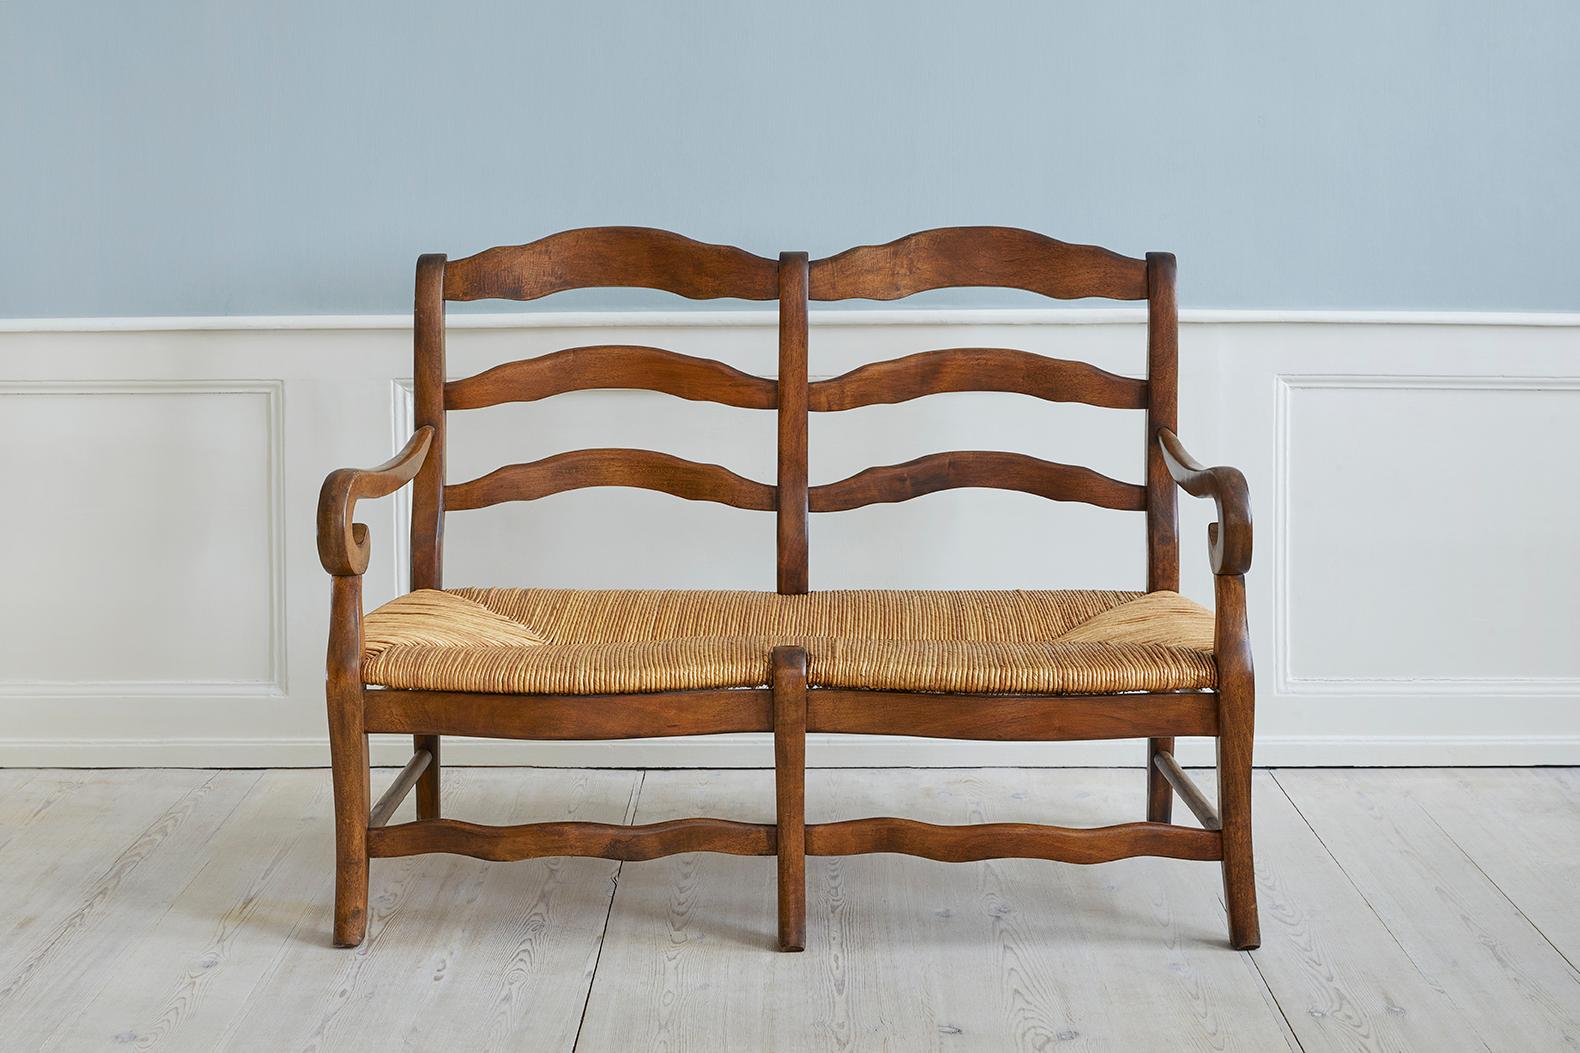 France, 19th Century

Provence bench in wood and rush seat.

H 90 x W 118 x D 55 cm